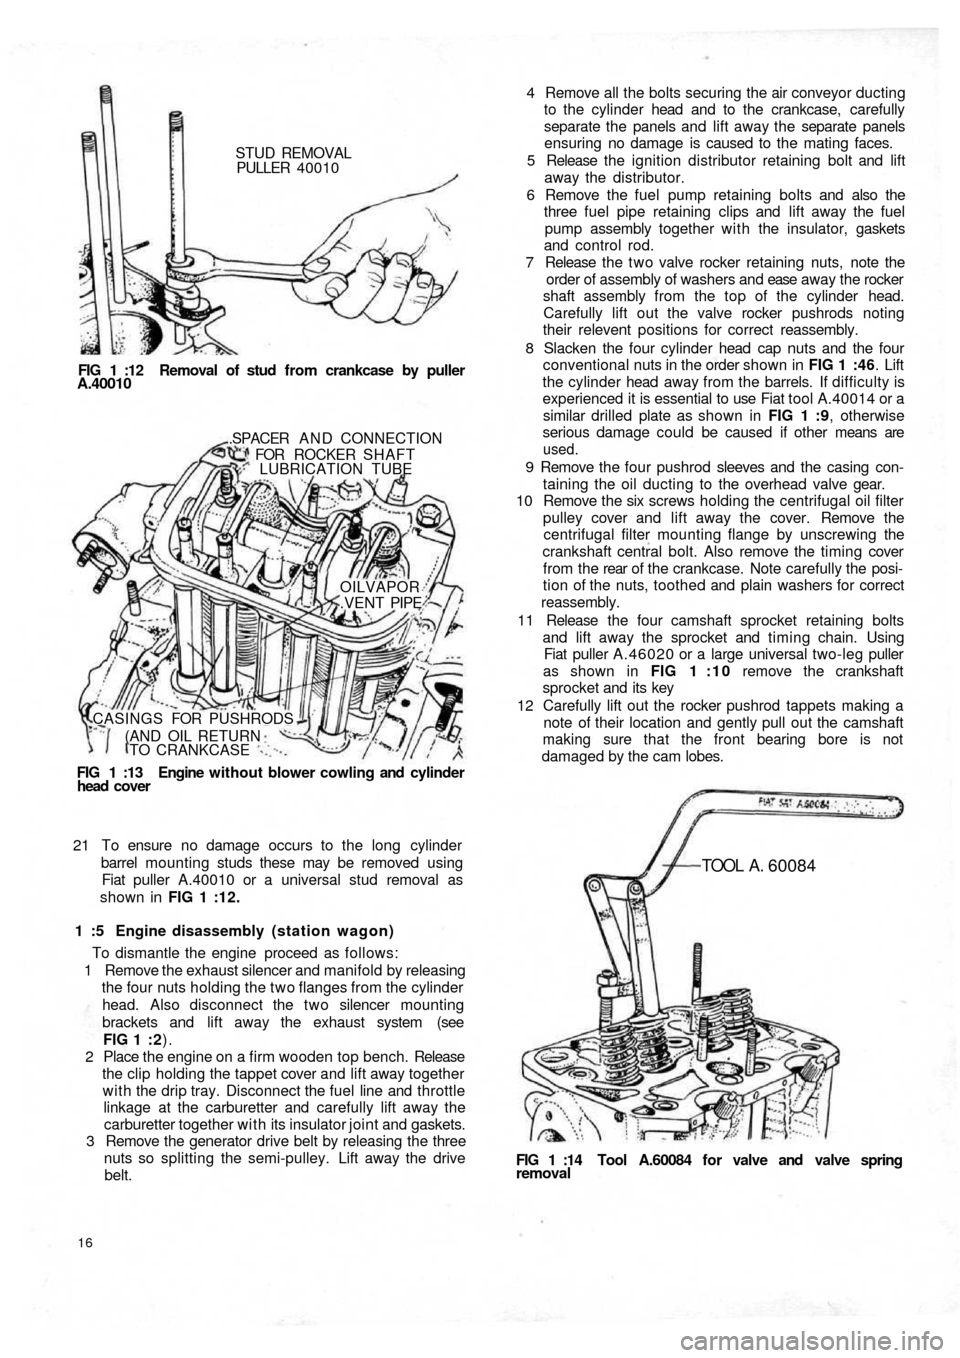 FIAT 500 1964 1.G Workshop Manual STUD REMOVAL
PULLER  40010
FIG 1 :12  Removal of stud from crankcase by puller
A.40010
FIG  1  :13   Engine  without blower cowling and cylinder
head  cover.SPACER  A N D  CONNECTION
FOR ROCKER SHAFT
